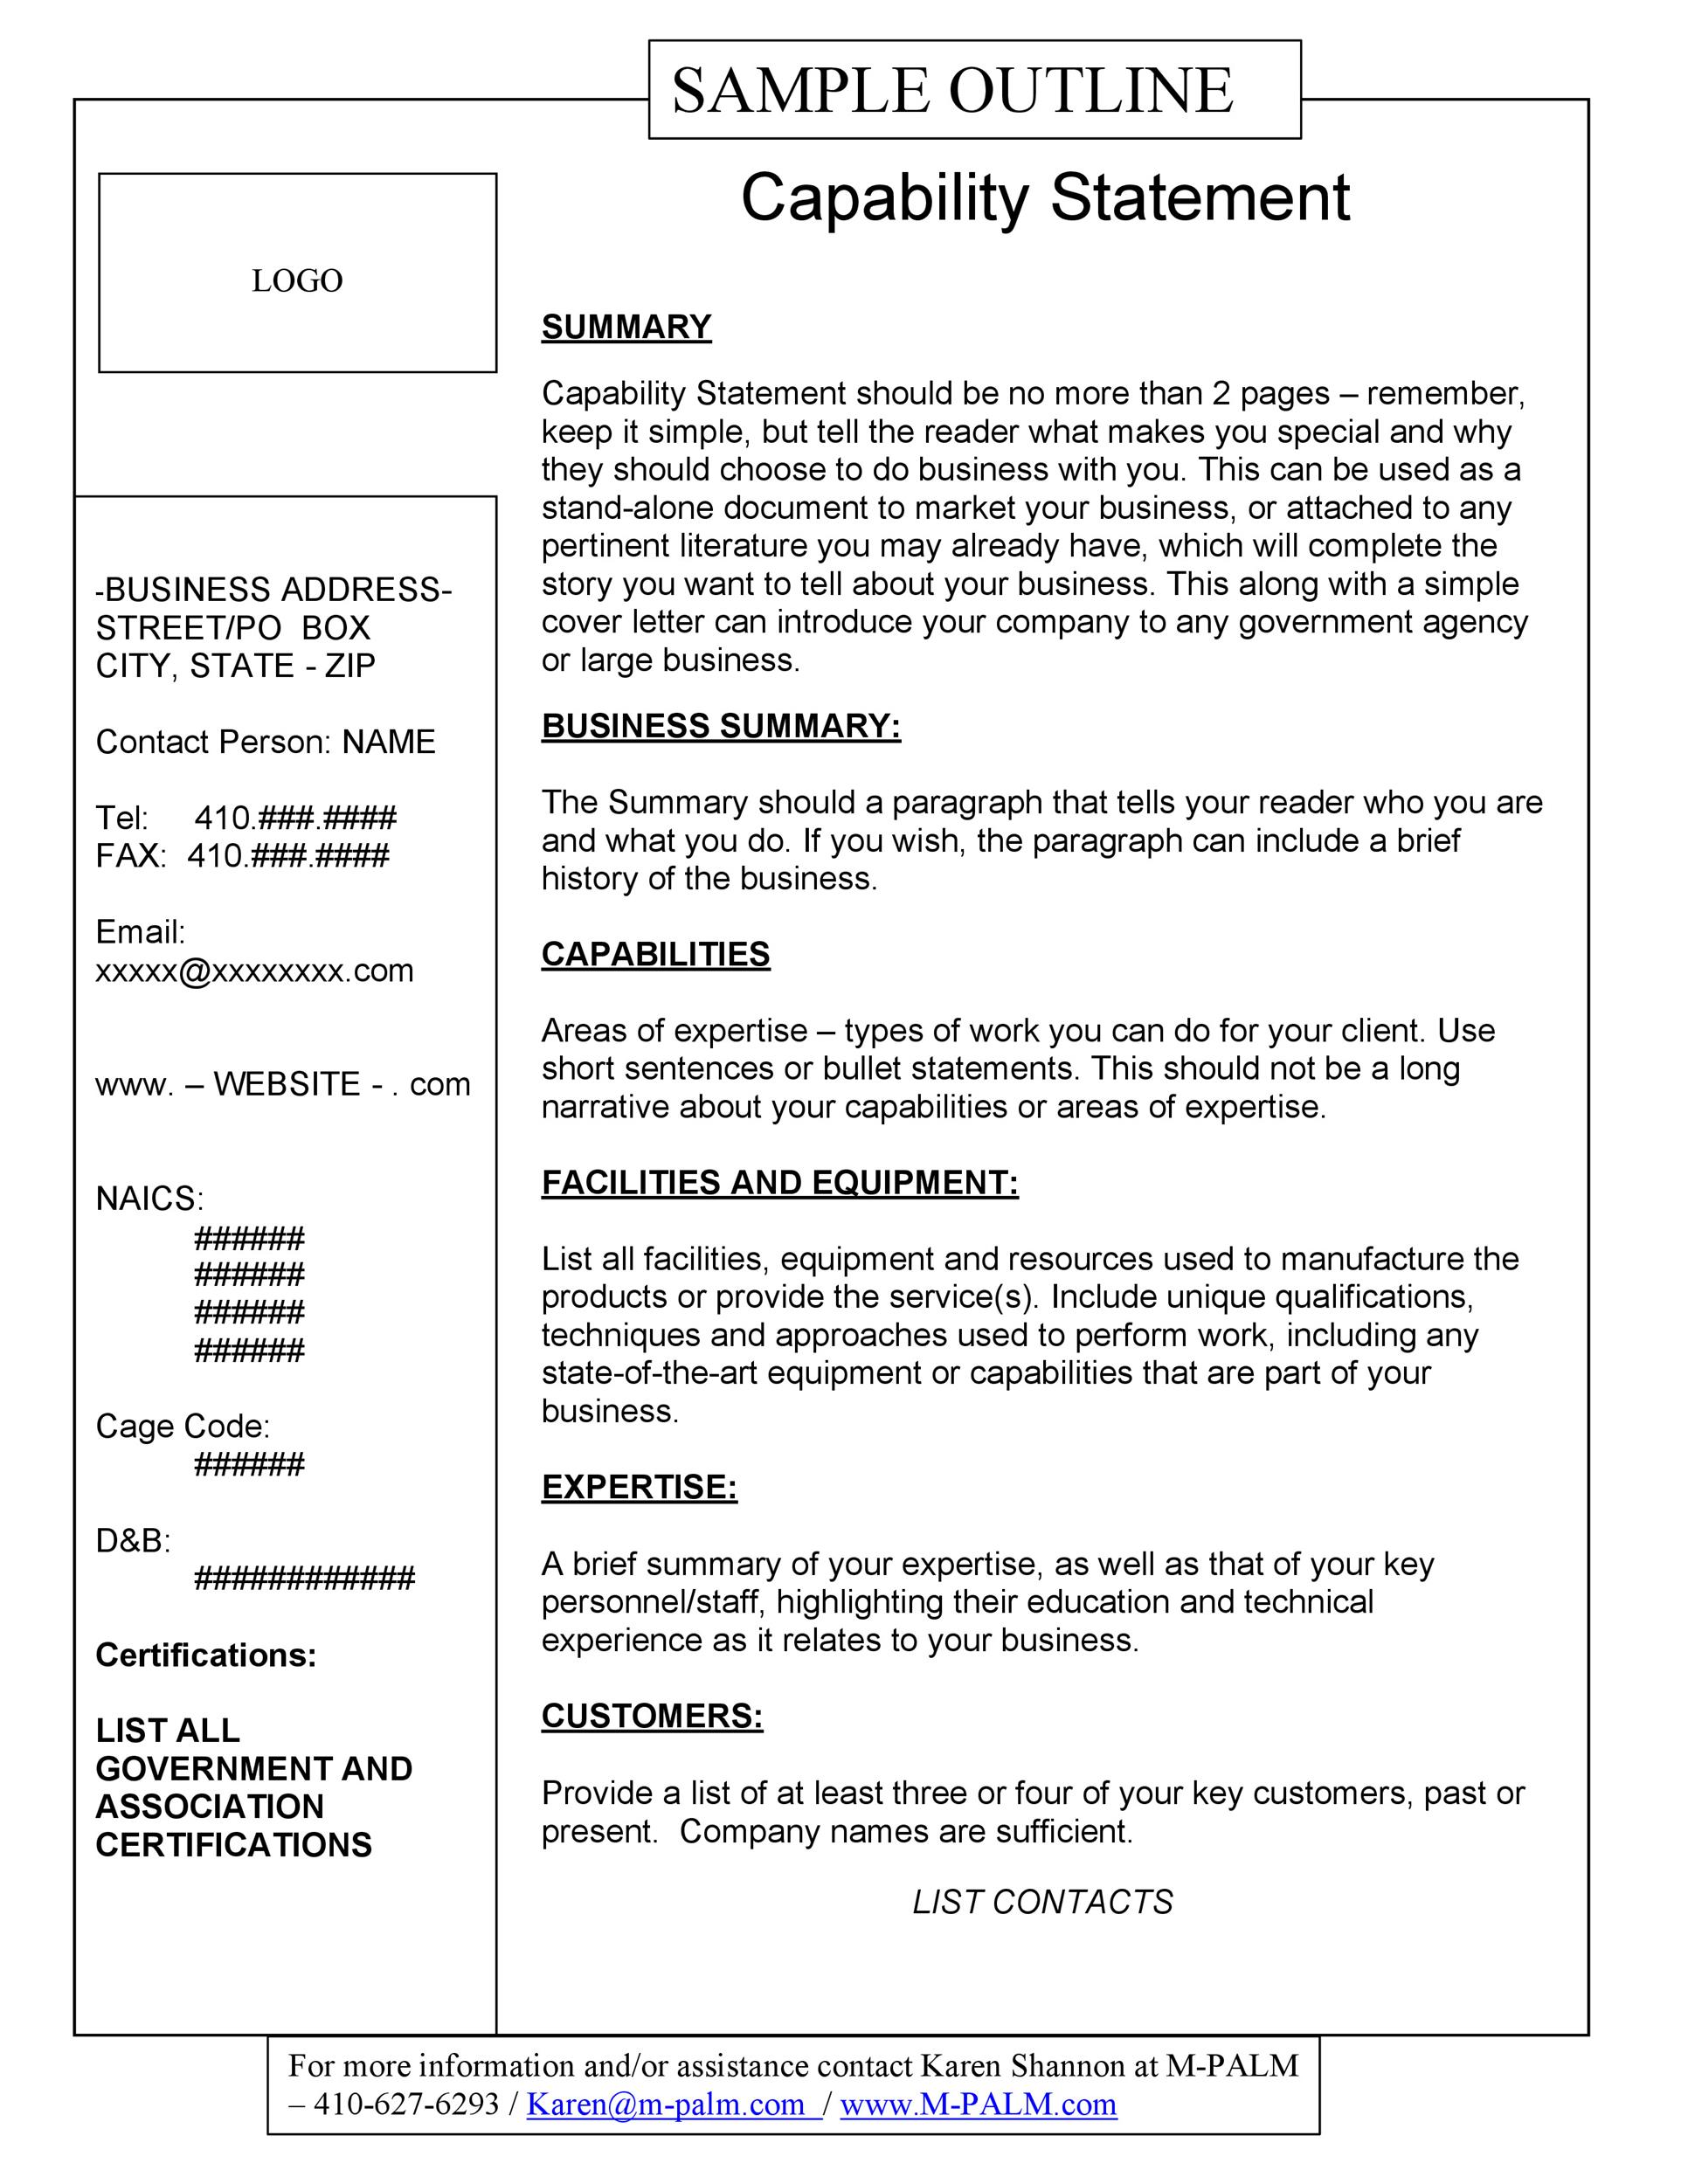 Capability Statement Template Word Document from templatelab.com